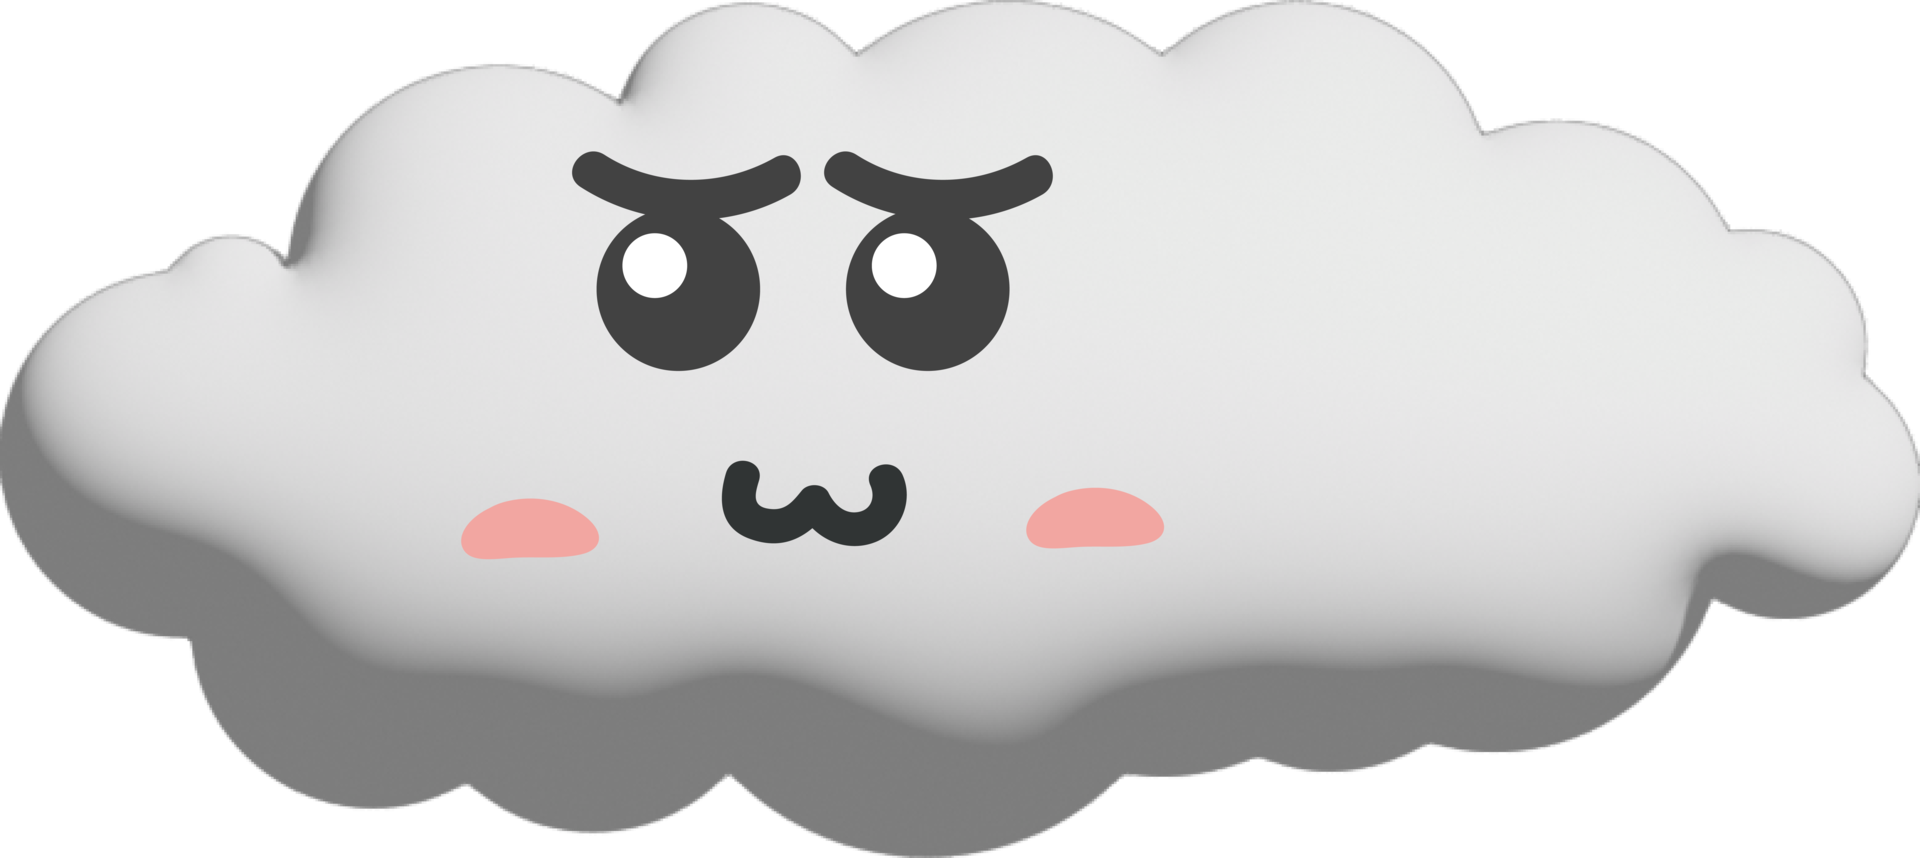 White cloud cartoon character crop-out png